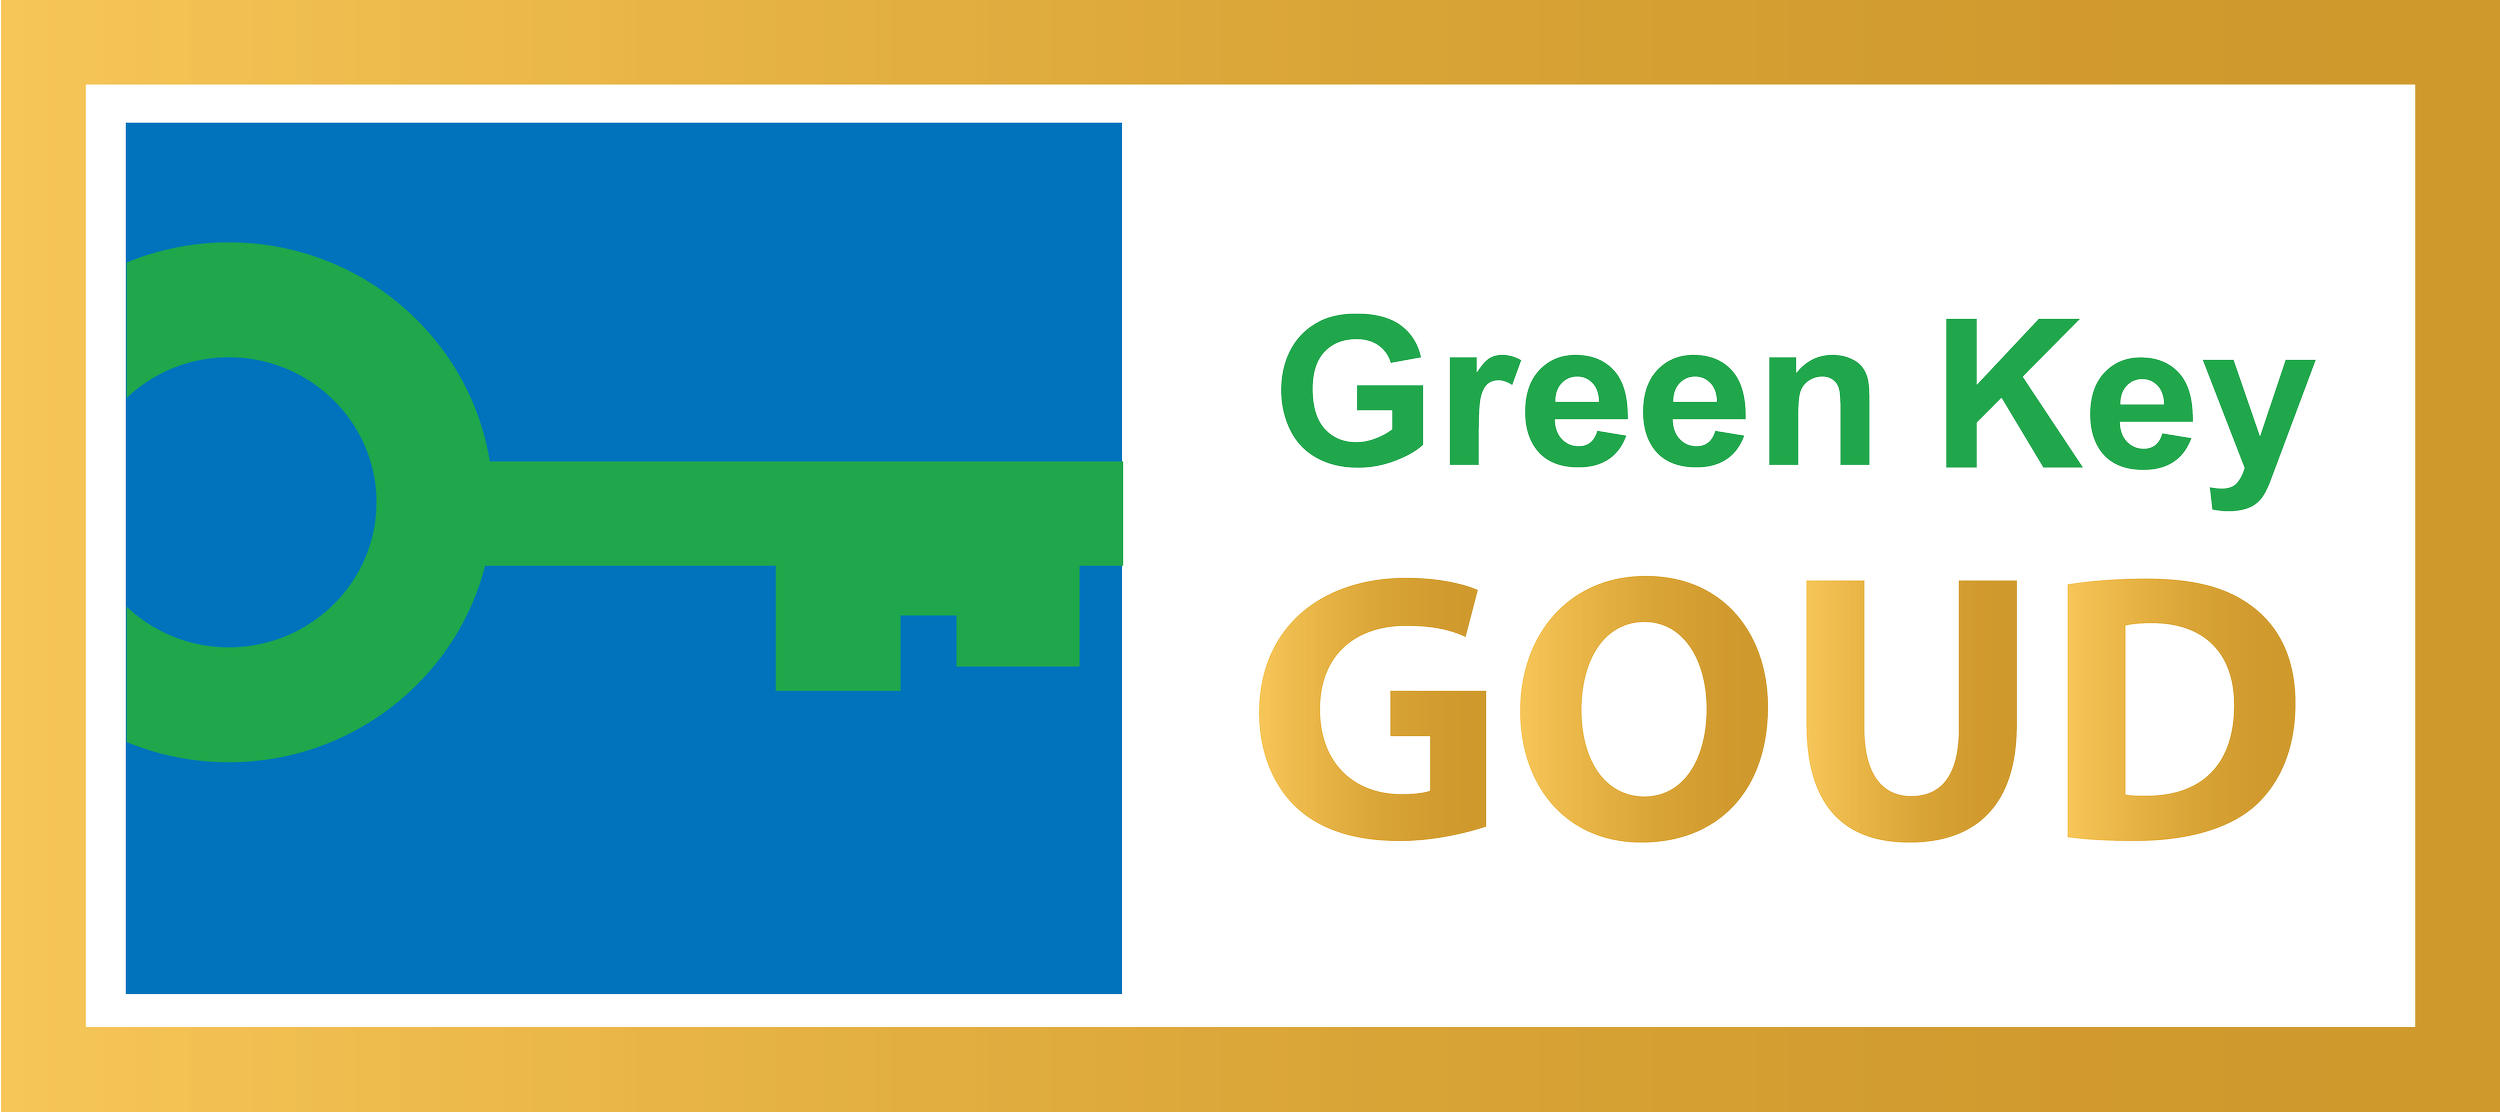 Since 2018, we have held the Green Key Gold certificate